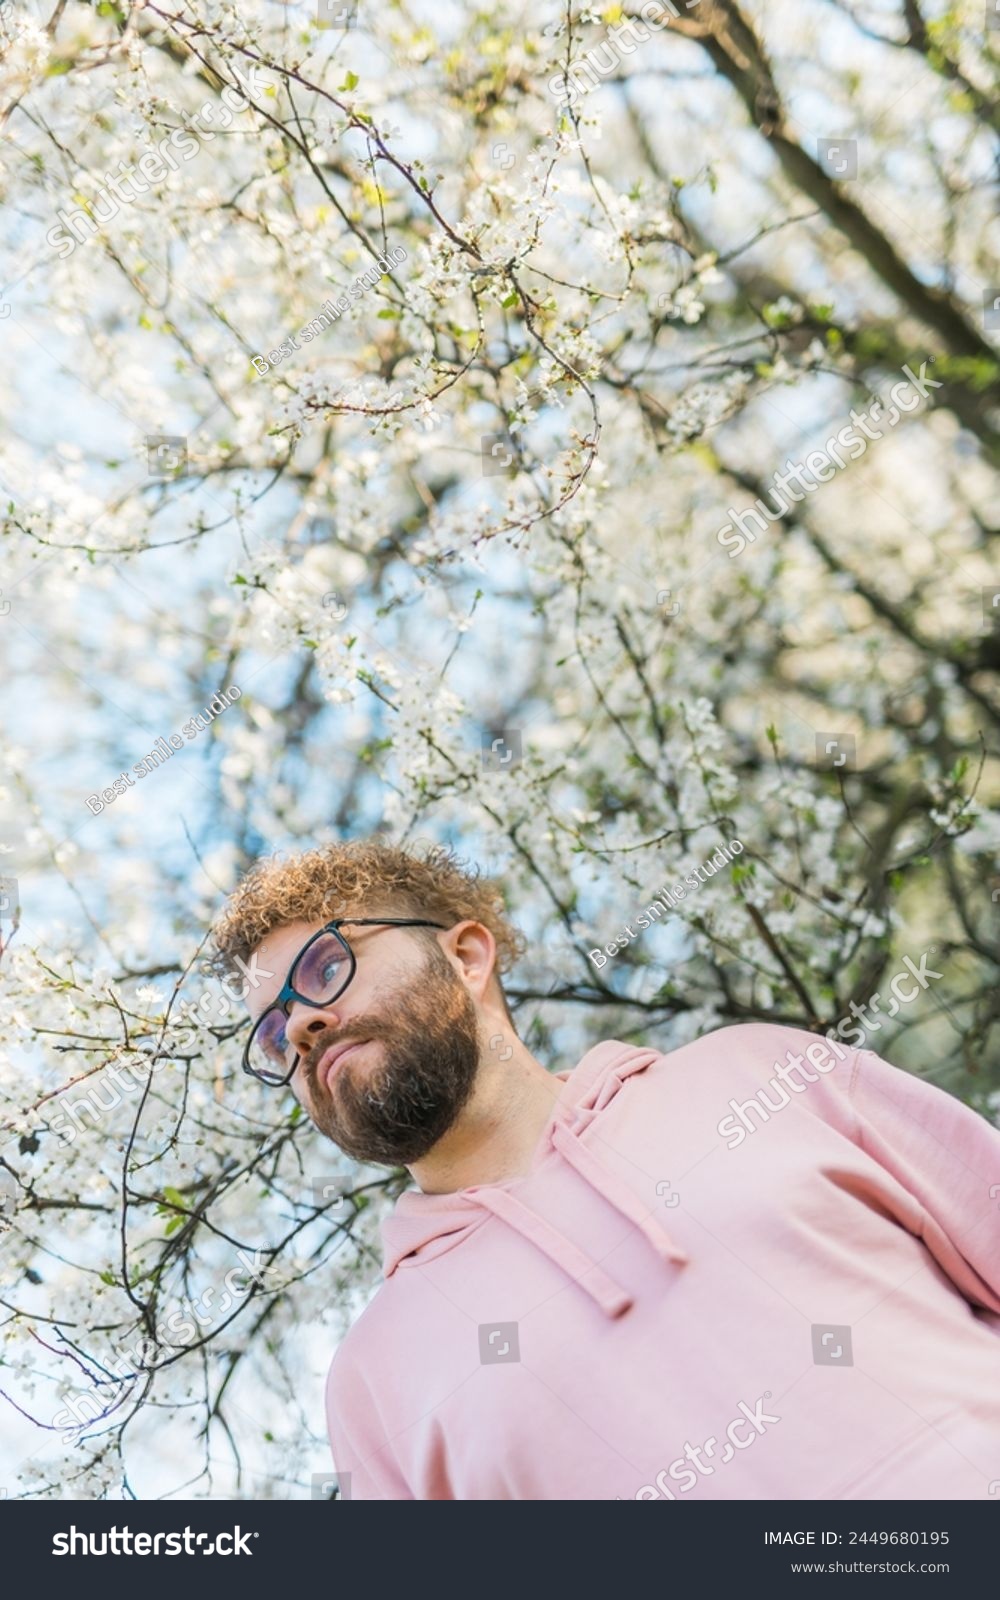 Handsome man outdoors portrait on background cherry blossoms or apple blossoms. Millennial generation guy and new masculinity concept #2449680195